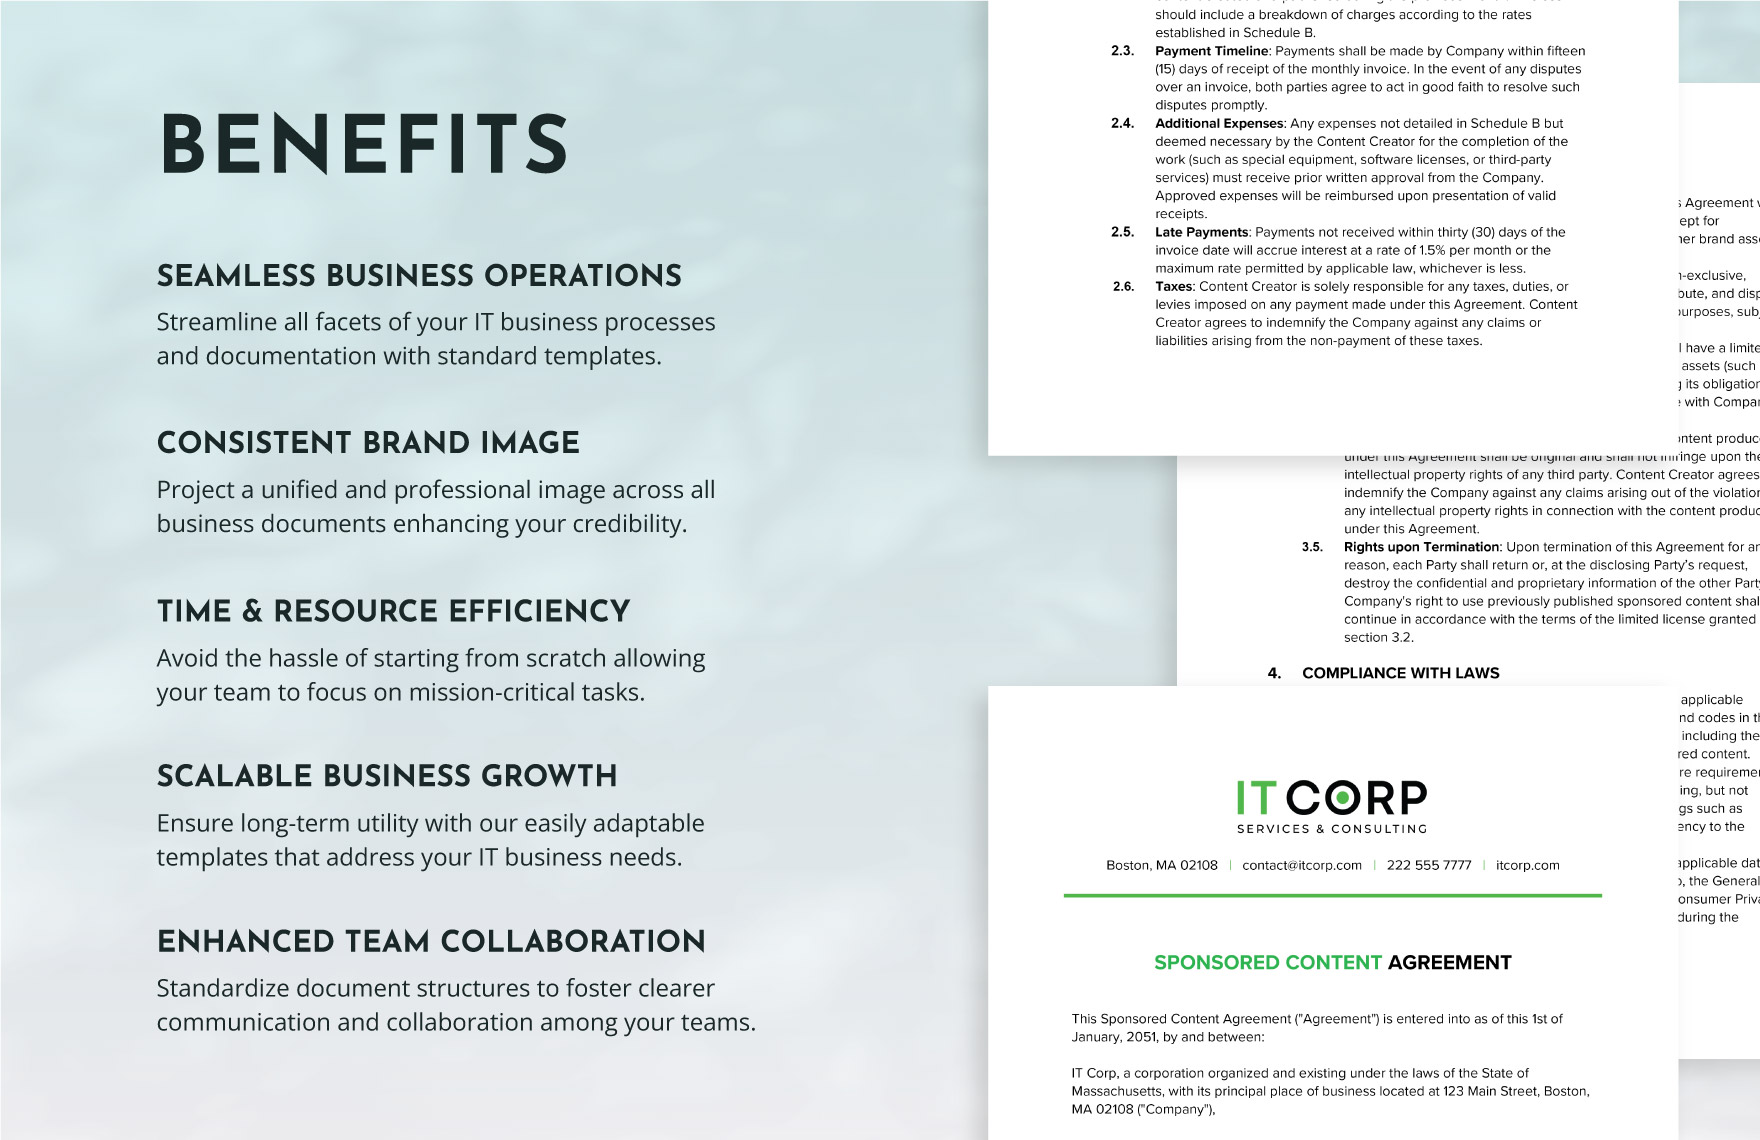 Sponsored Content Agreement Template